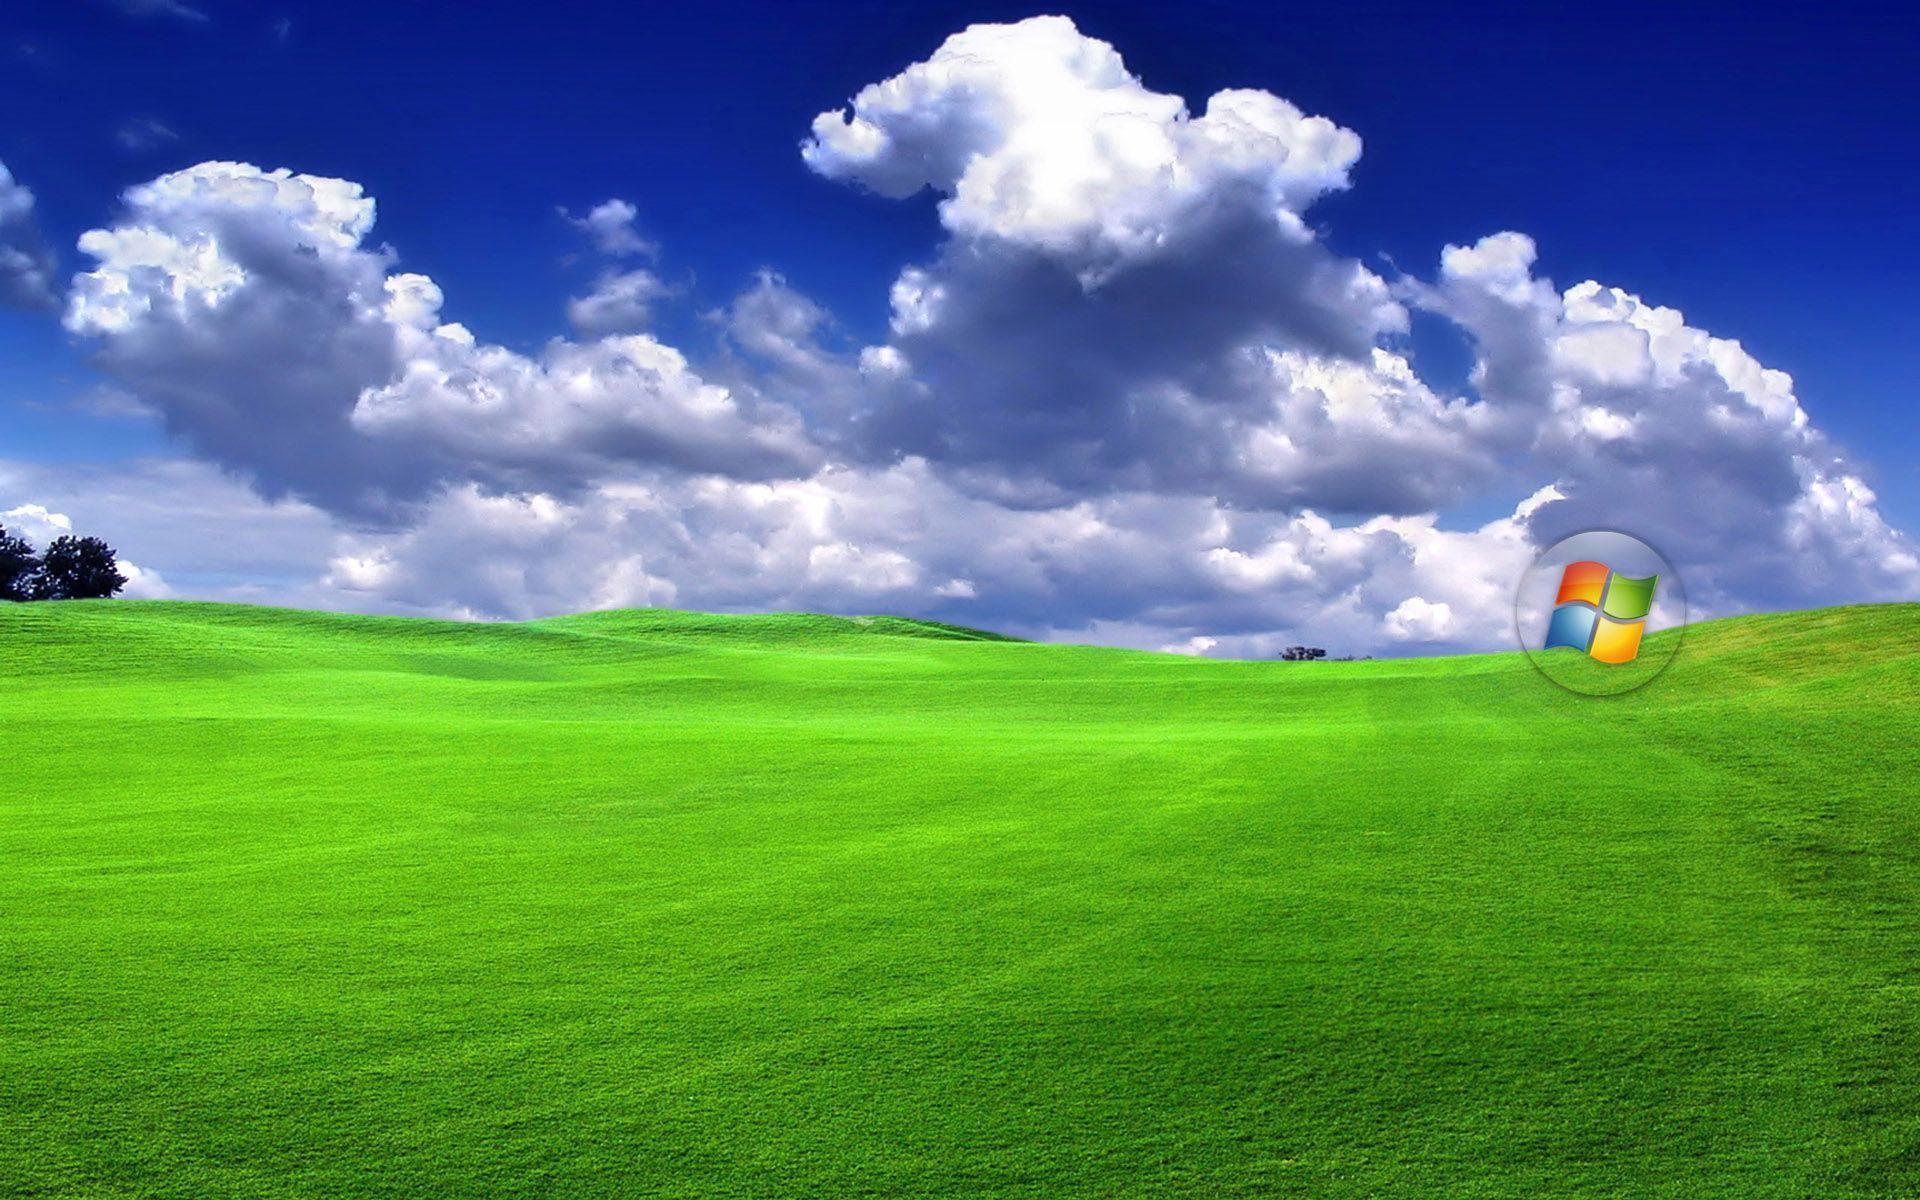 hd wallpapers nature for windows 7